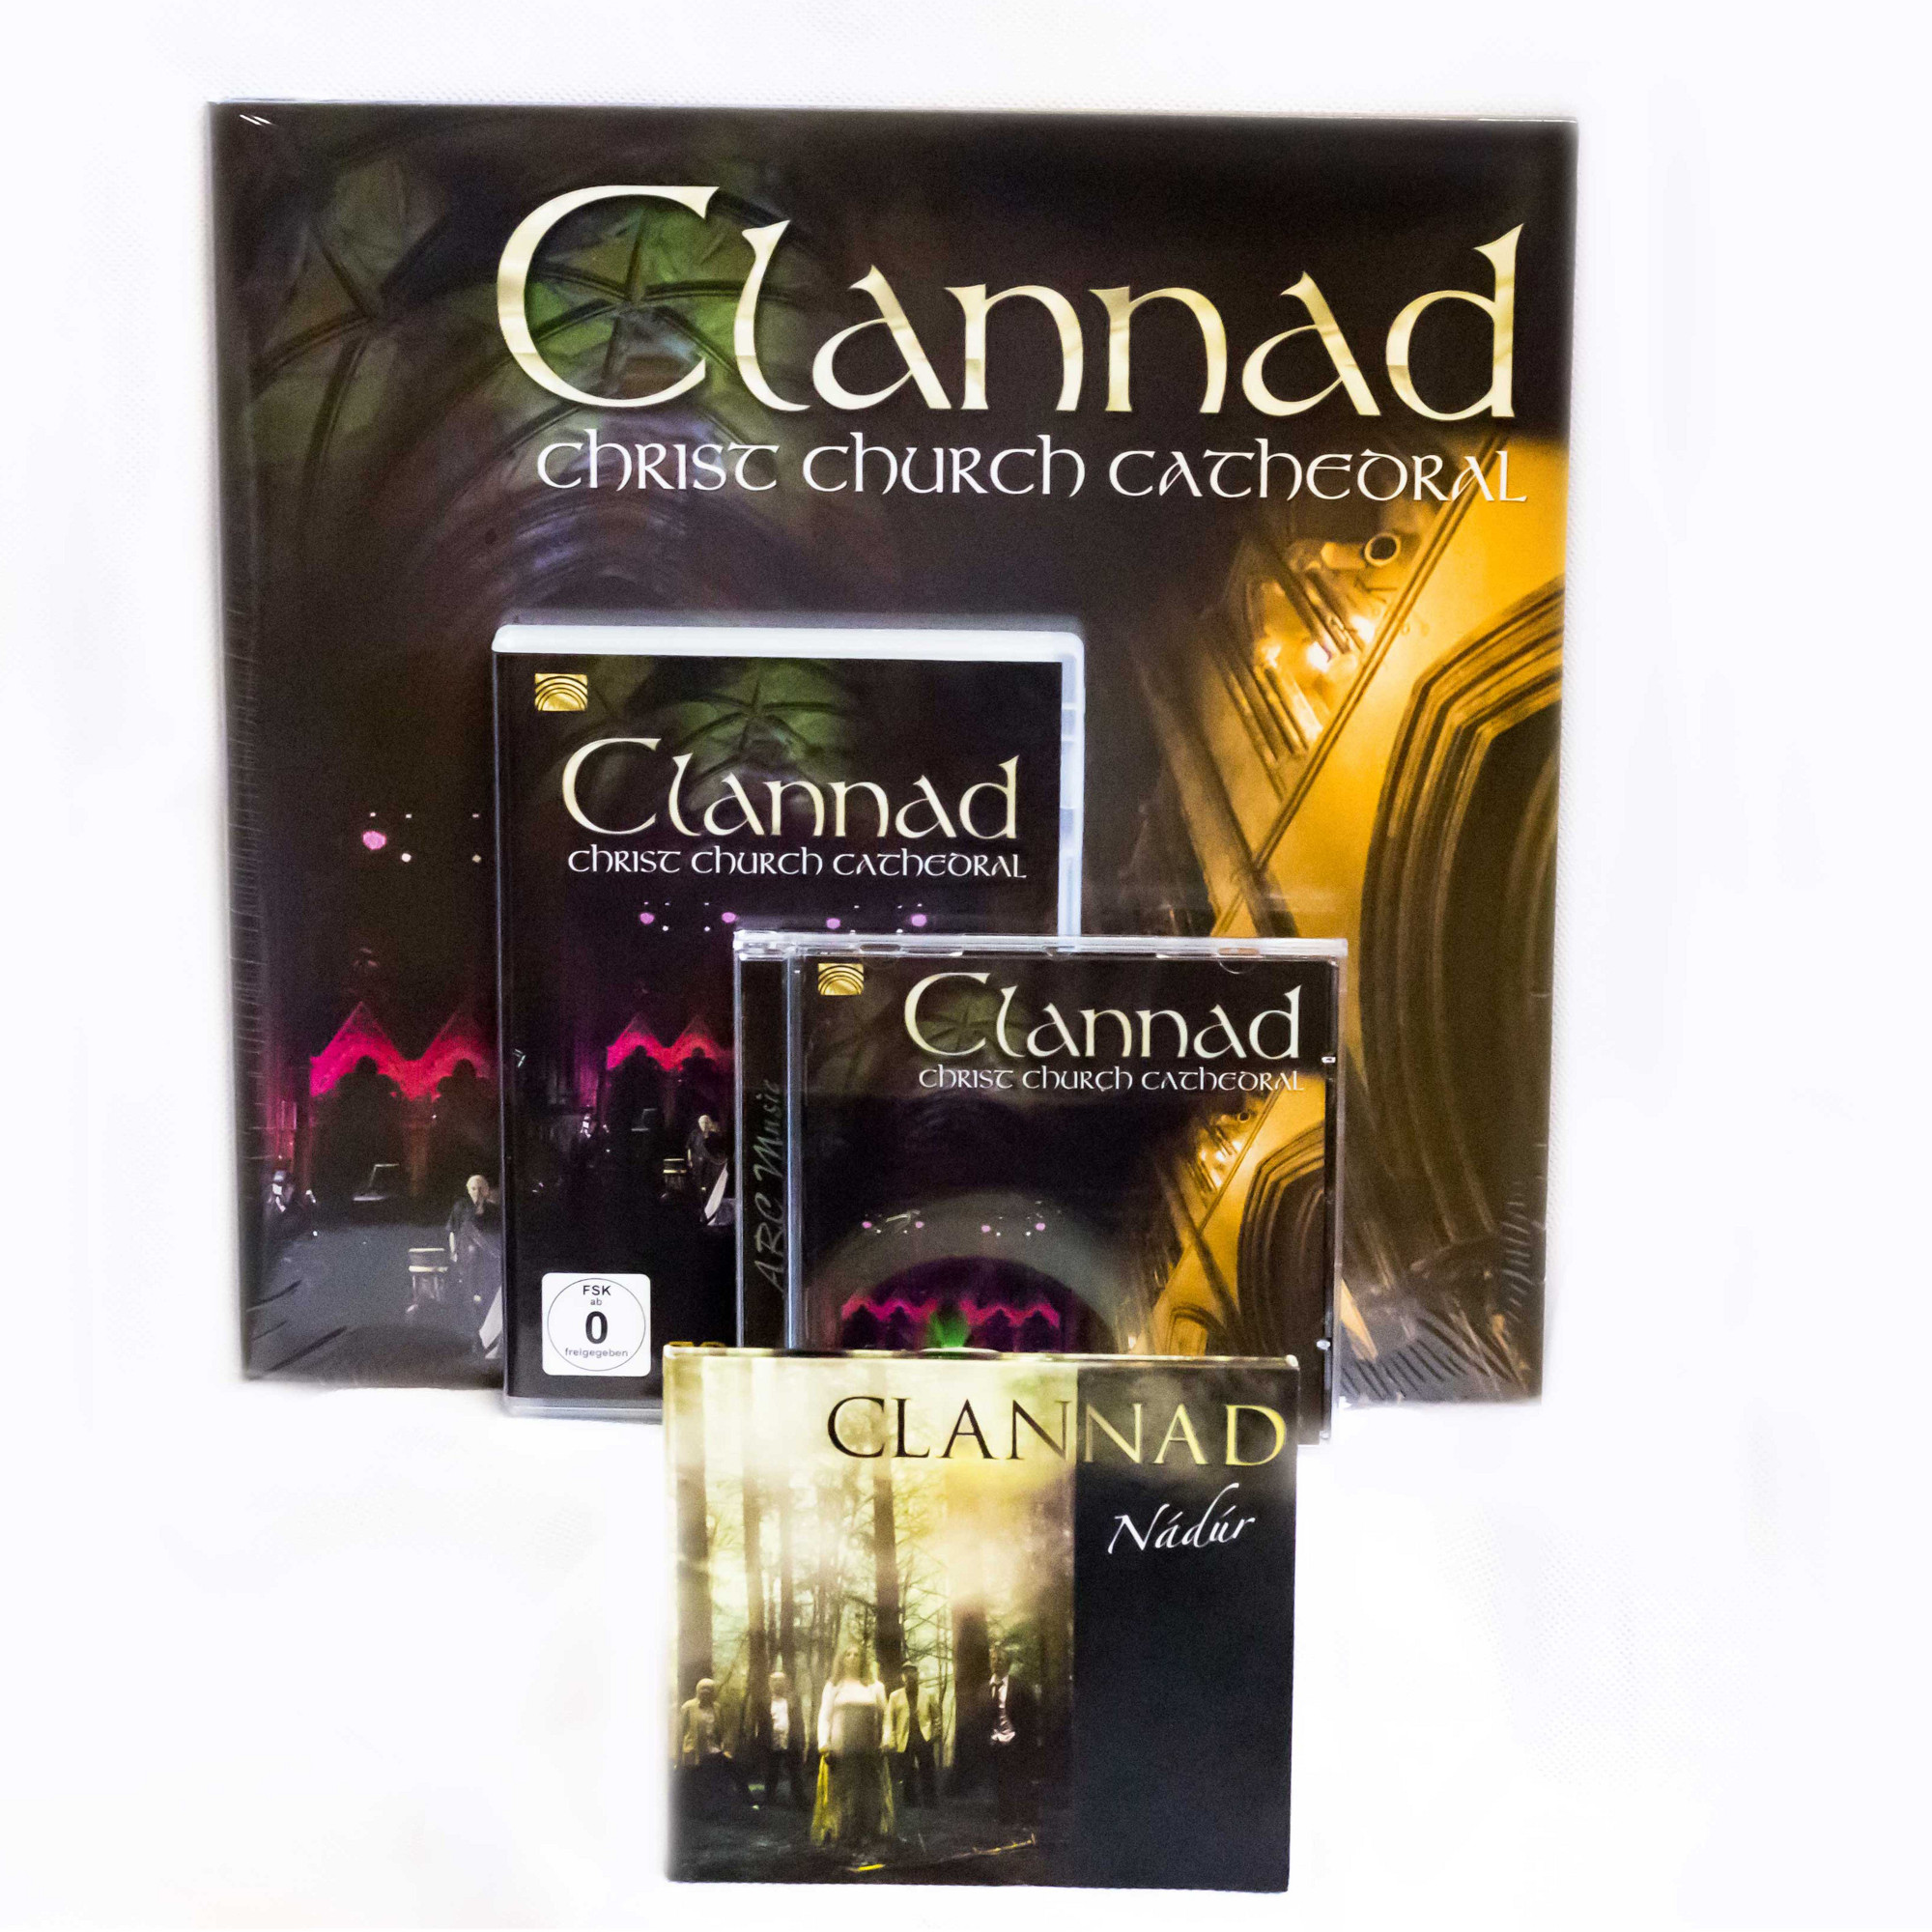 Clannad Clannad 40 Year Collection